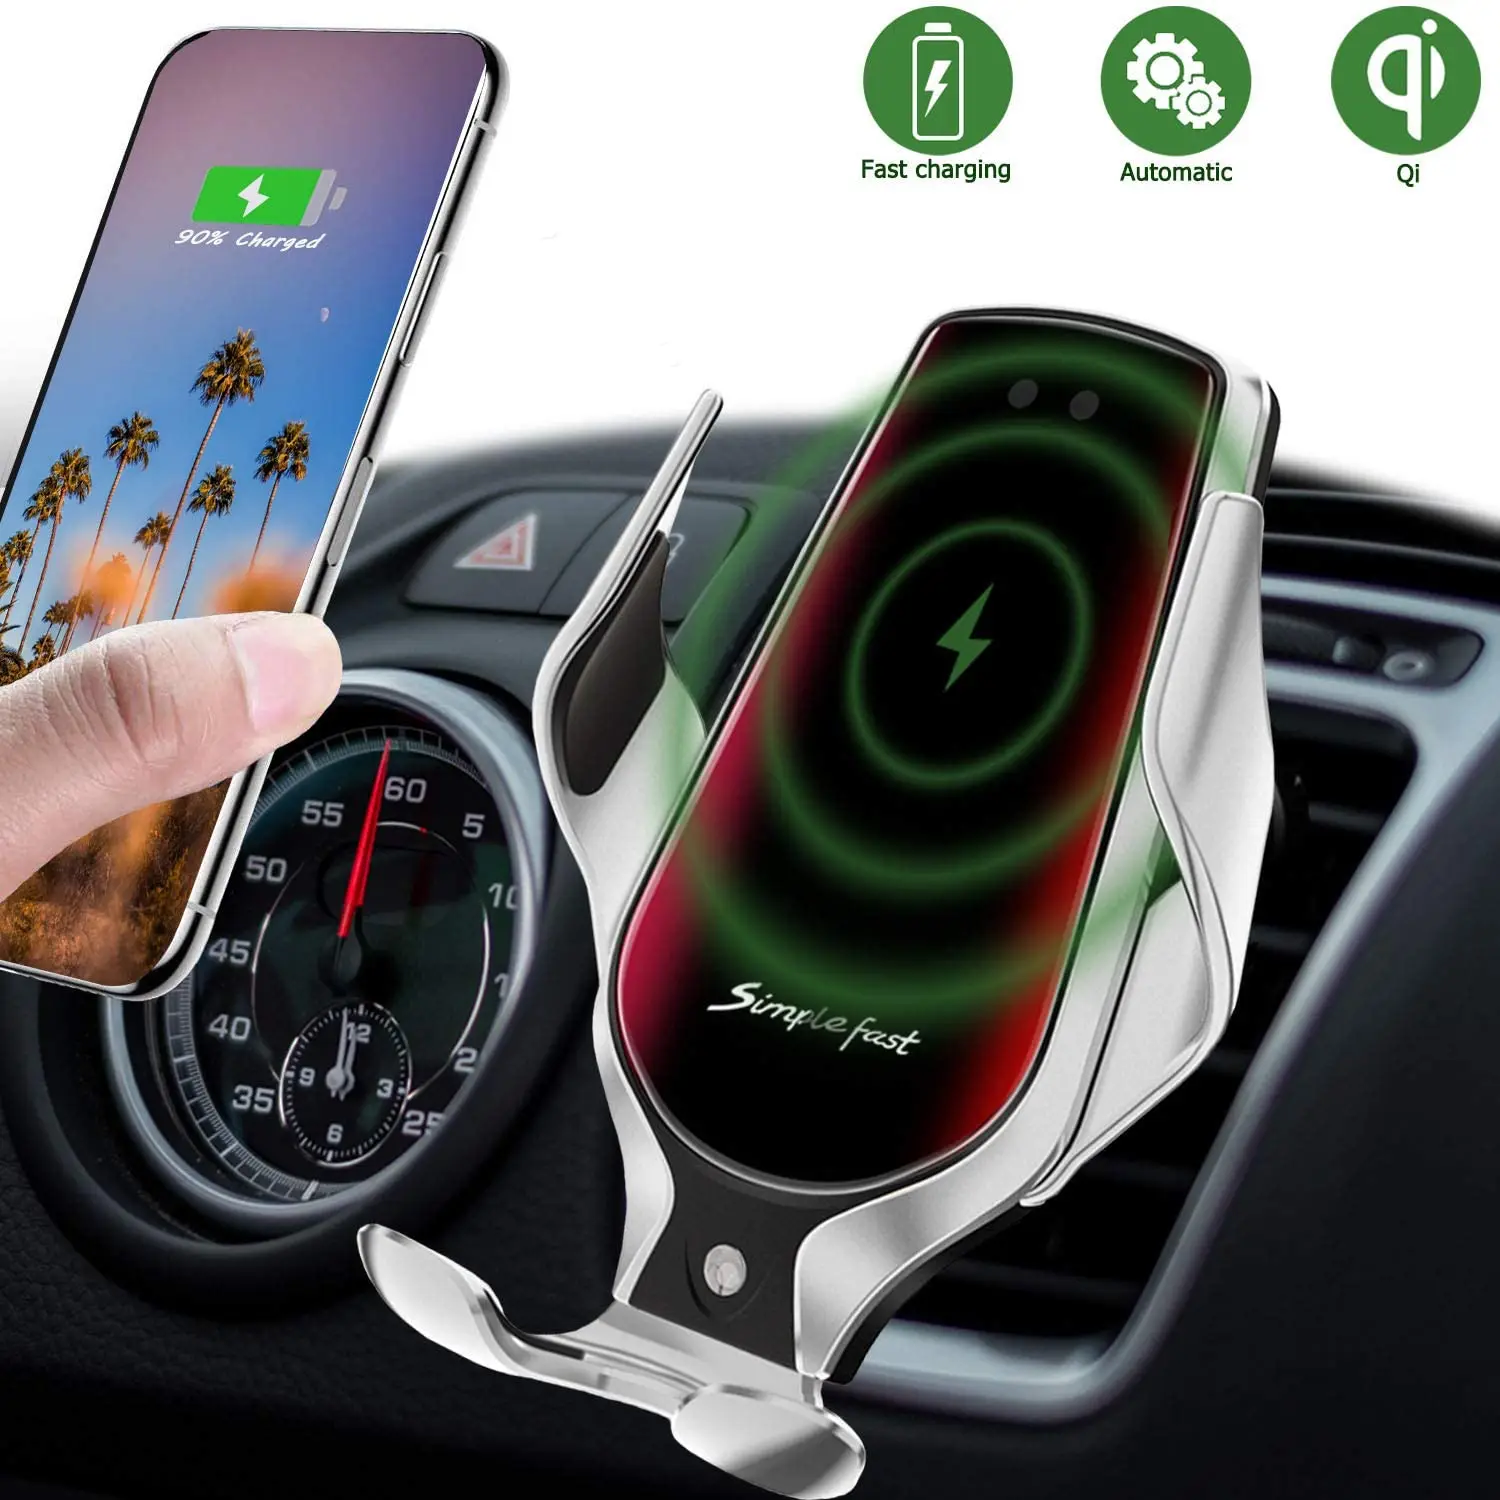 

R3 Automatic Clamping Car Qi Wireless Charger 10W Fast Charging For Iphone 11 Pro XR XS Huawei P30 Pro Auto-Sensor Phone Holder